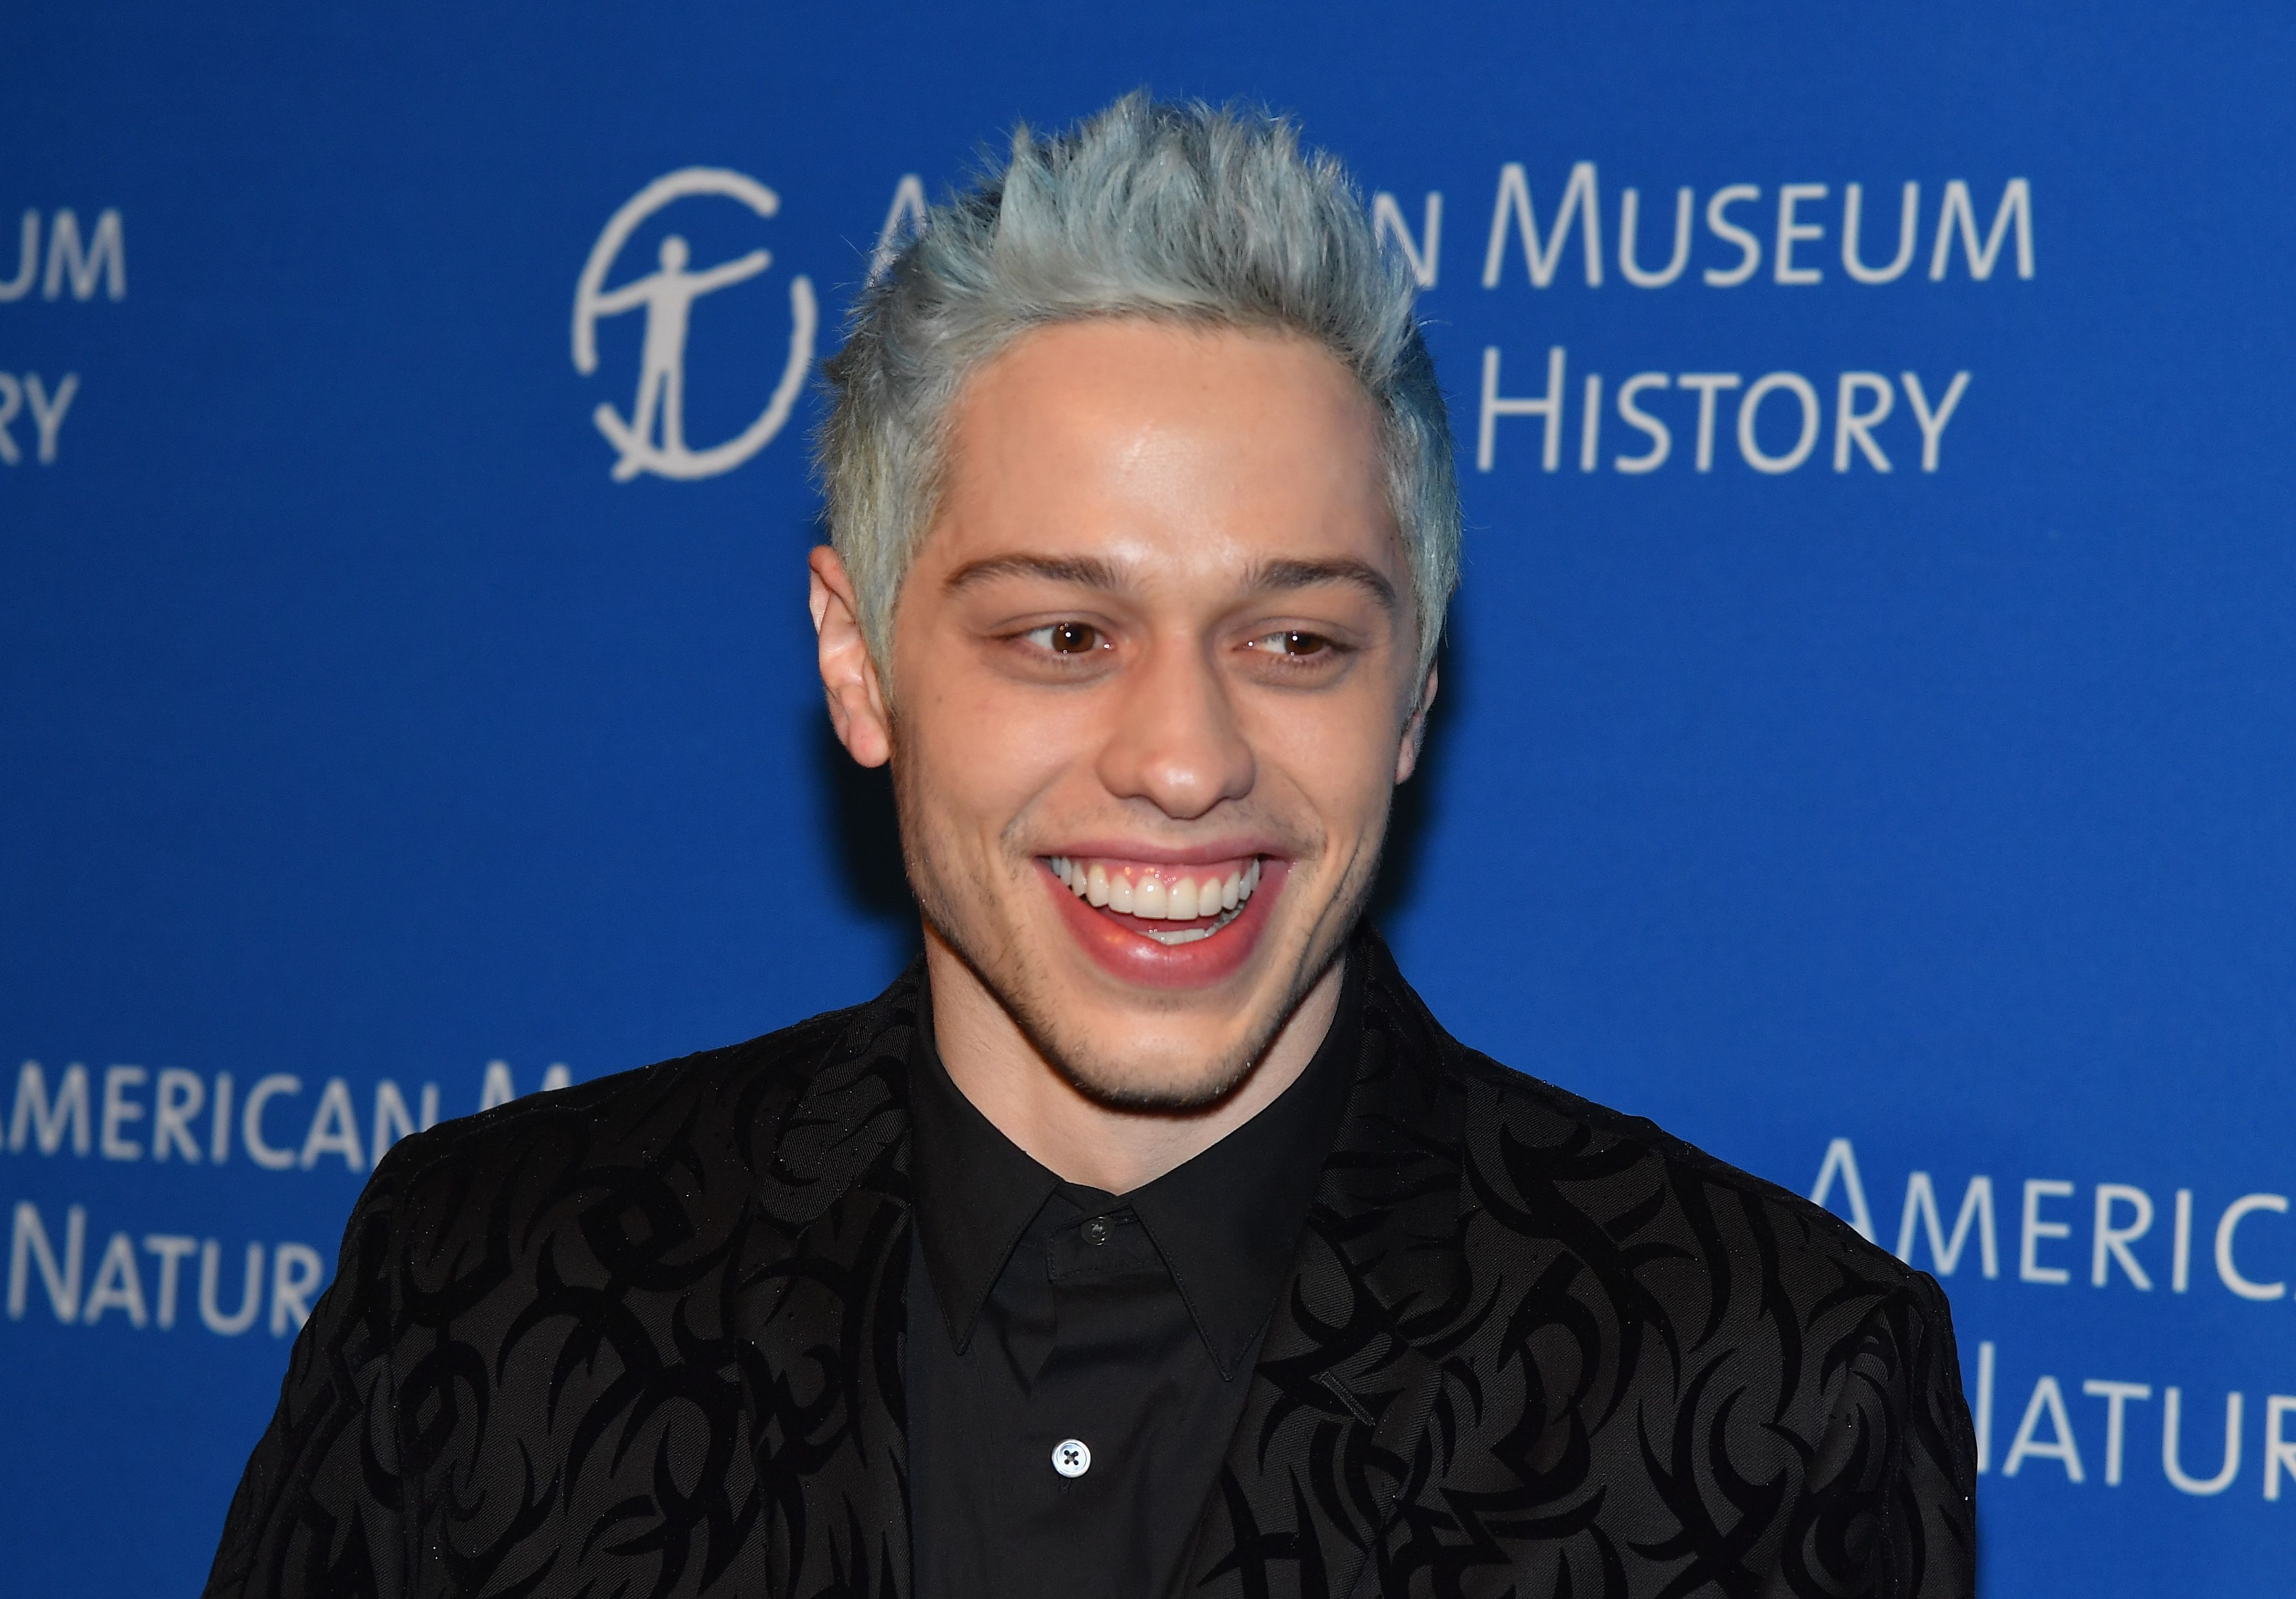 Comedian Pete Davidson attends the American Museum of Natural History's 2018 Museum Gala on November 15, 2018 in New York City. (Photo credit ANGELA WEISS/AFP/Getty Images)